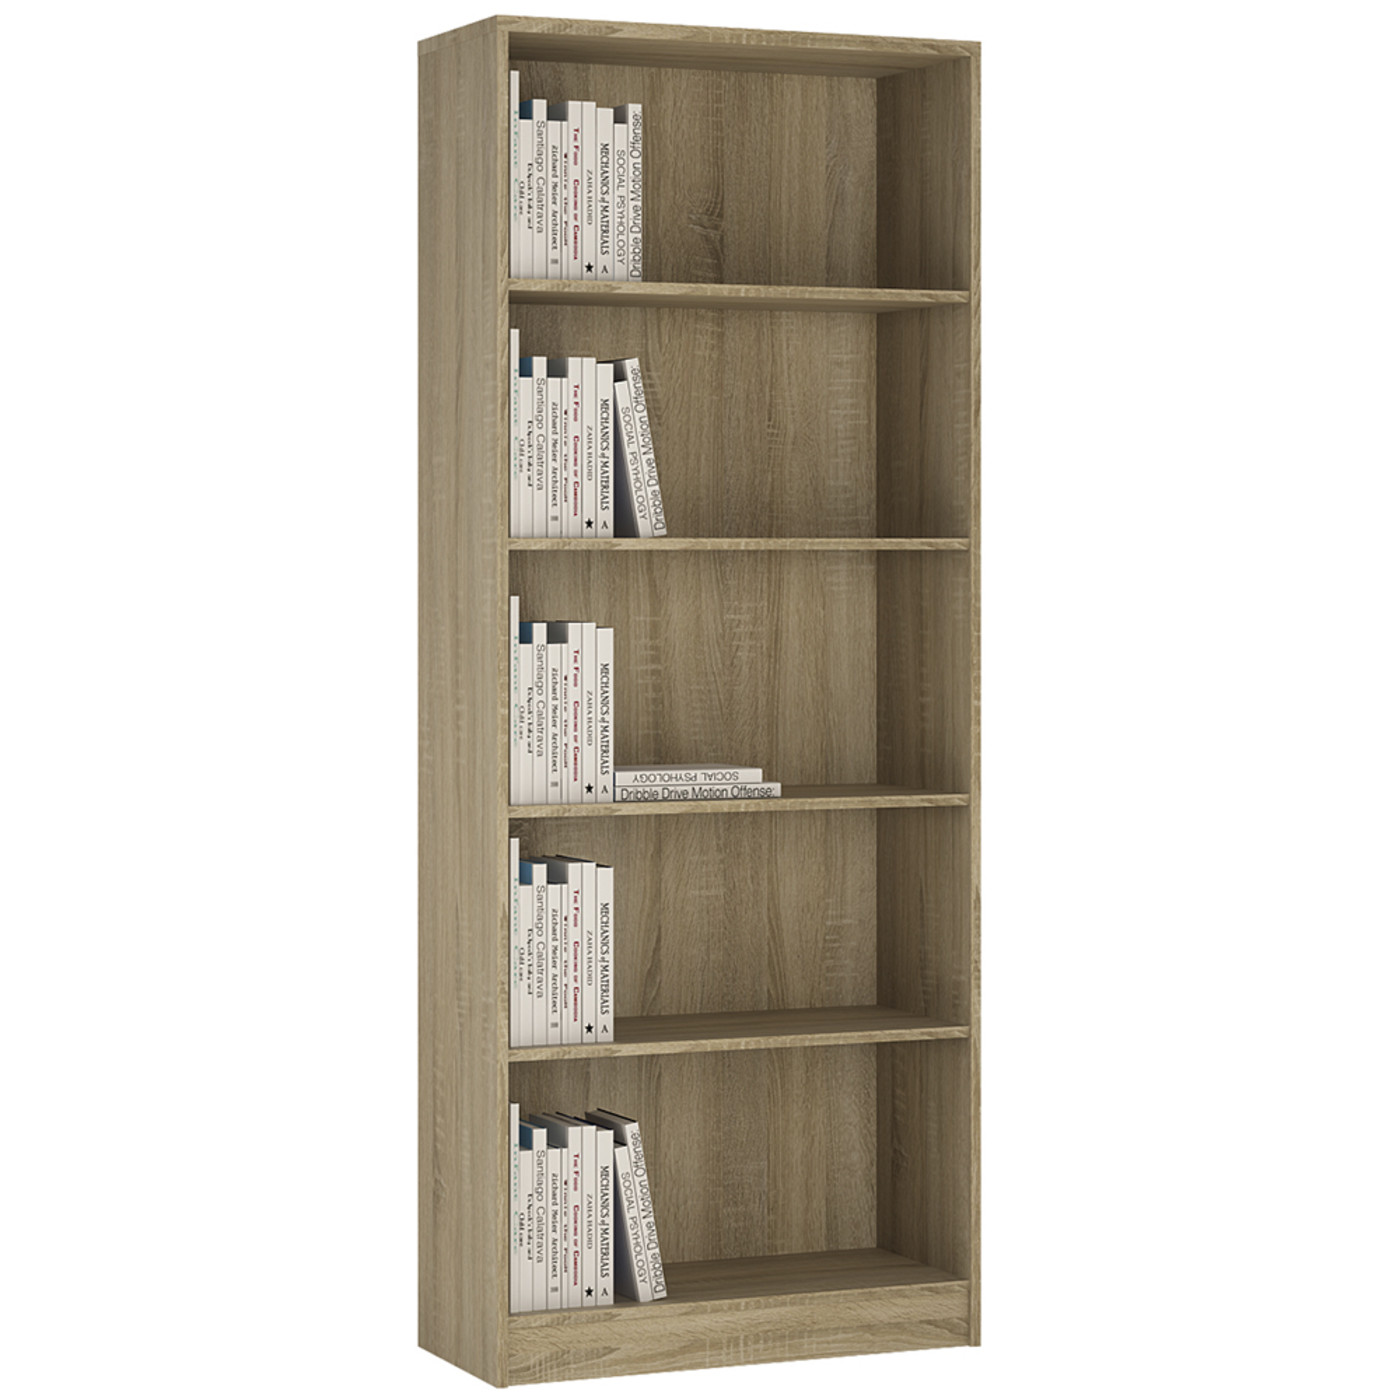 4 You Tall Wide Bookcase In Sonama Oak, Tall And Wide Bookcase